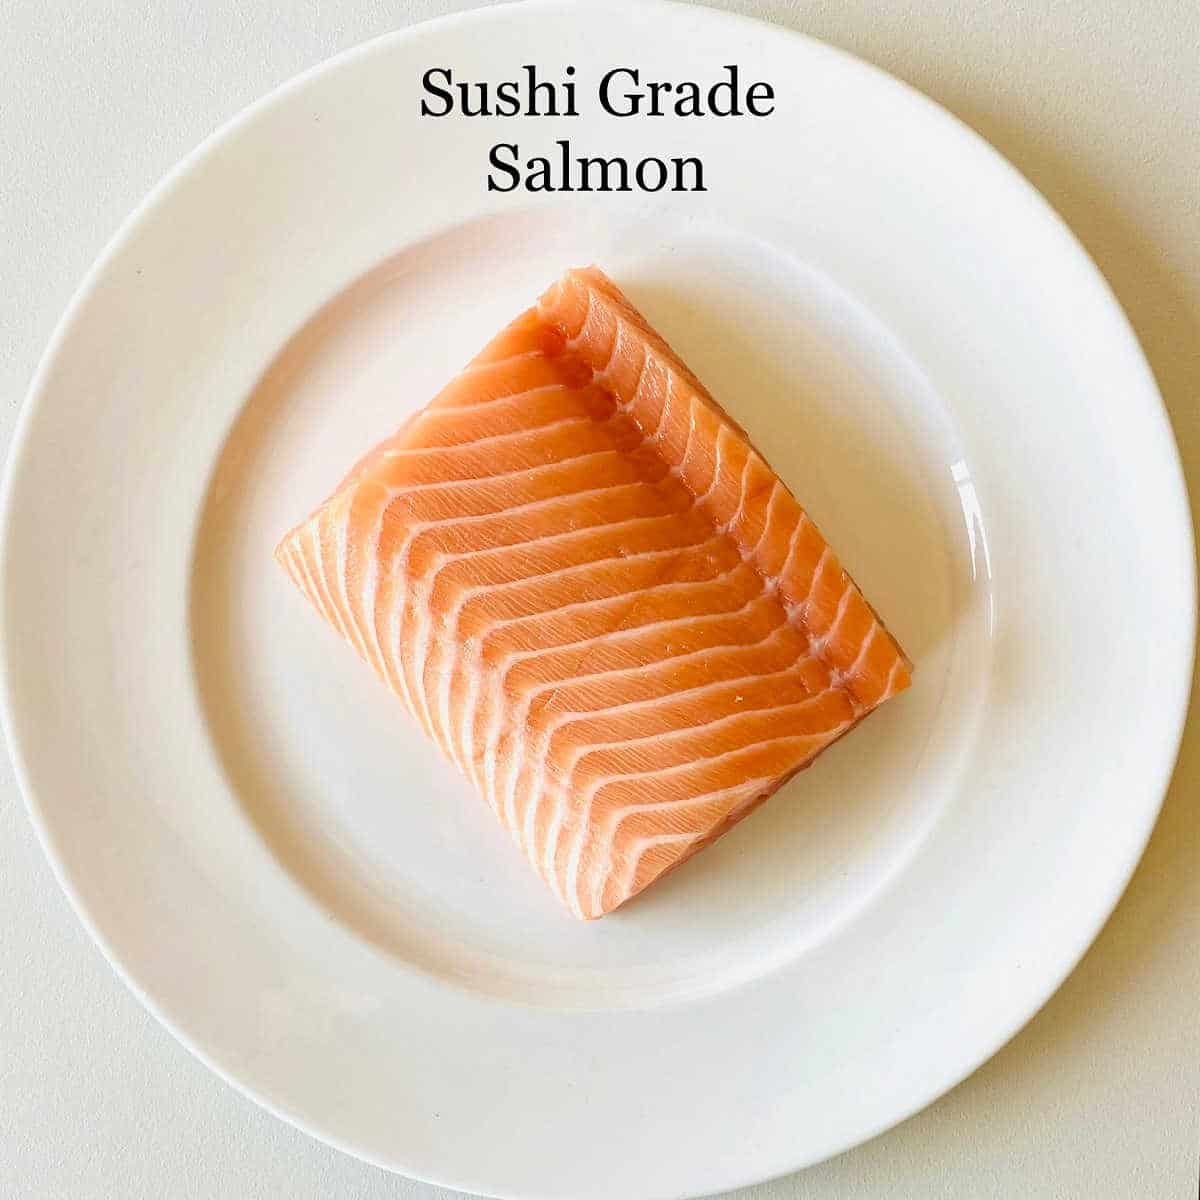 labeled picture of salmon filet on plate